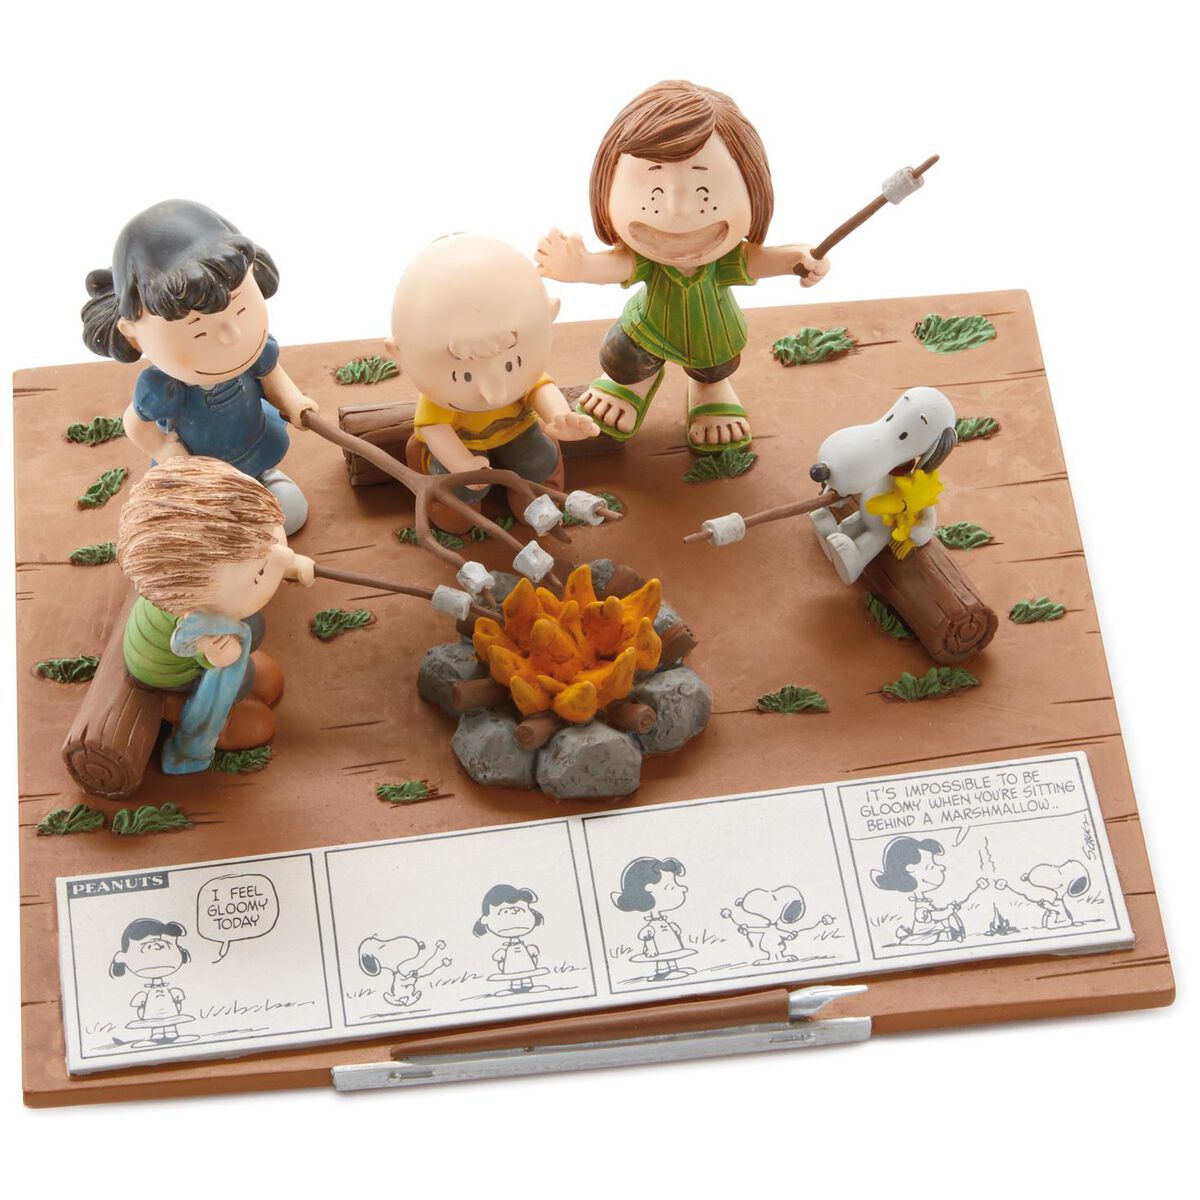 Peanuts® It Was a Short Summer, Charlie Brown 2019 Limited